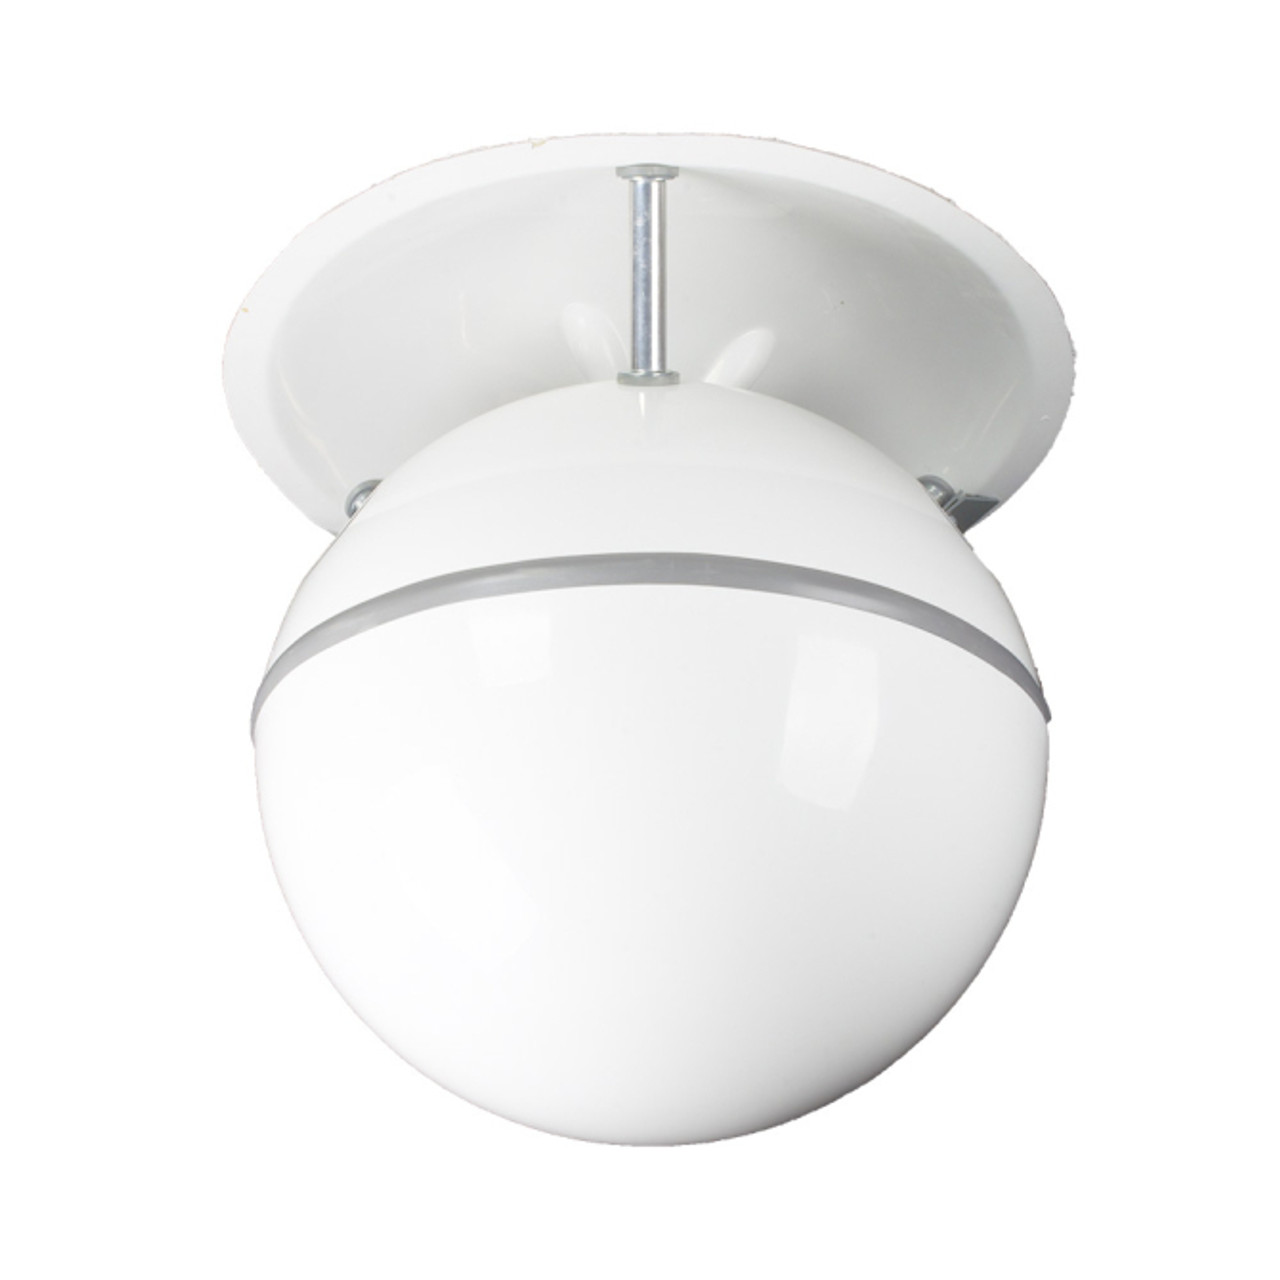 Soundsphere SS-Q-12A-WH Q-12A Loudspeaker in White (SS-Q-12A-WH)